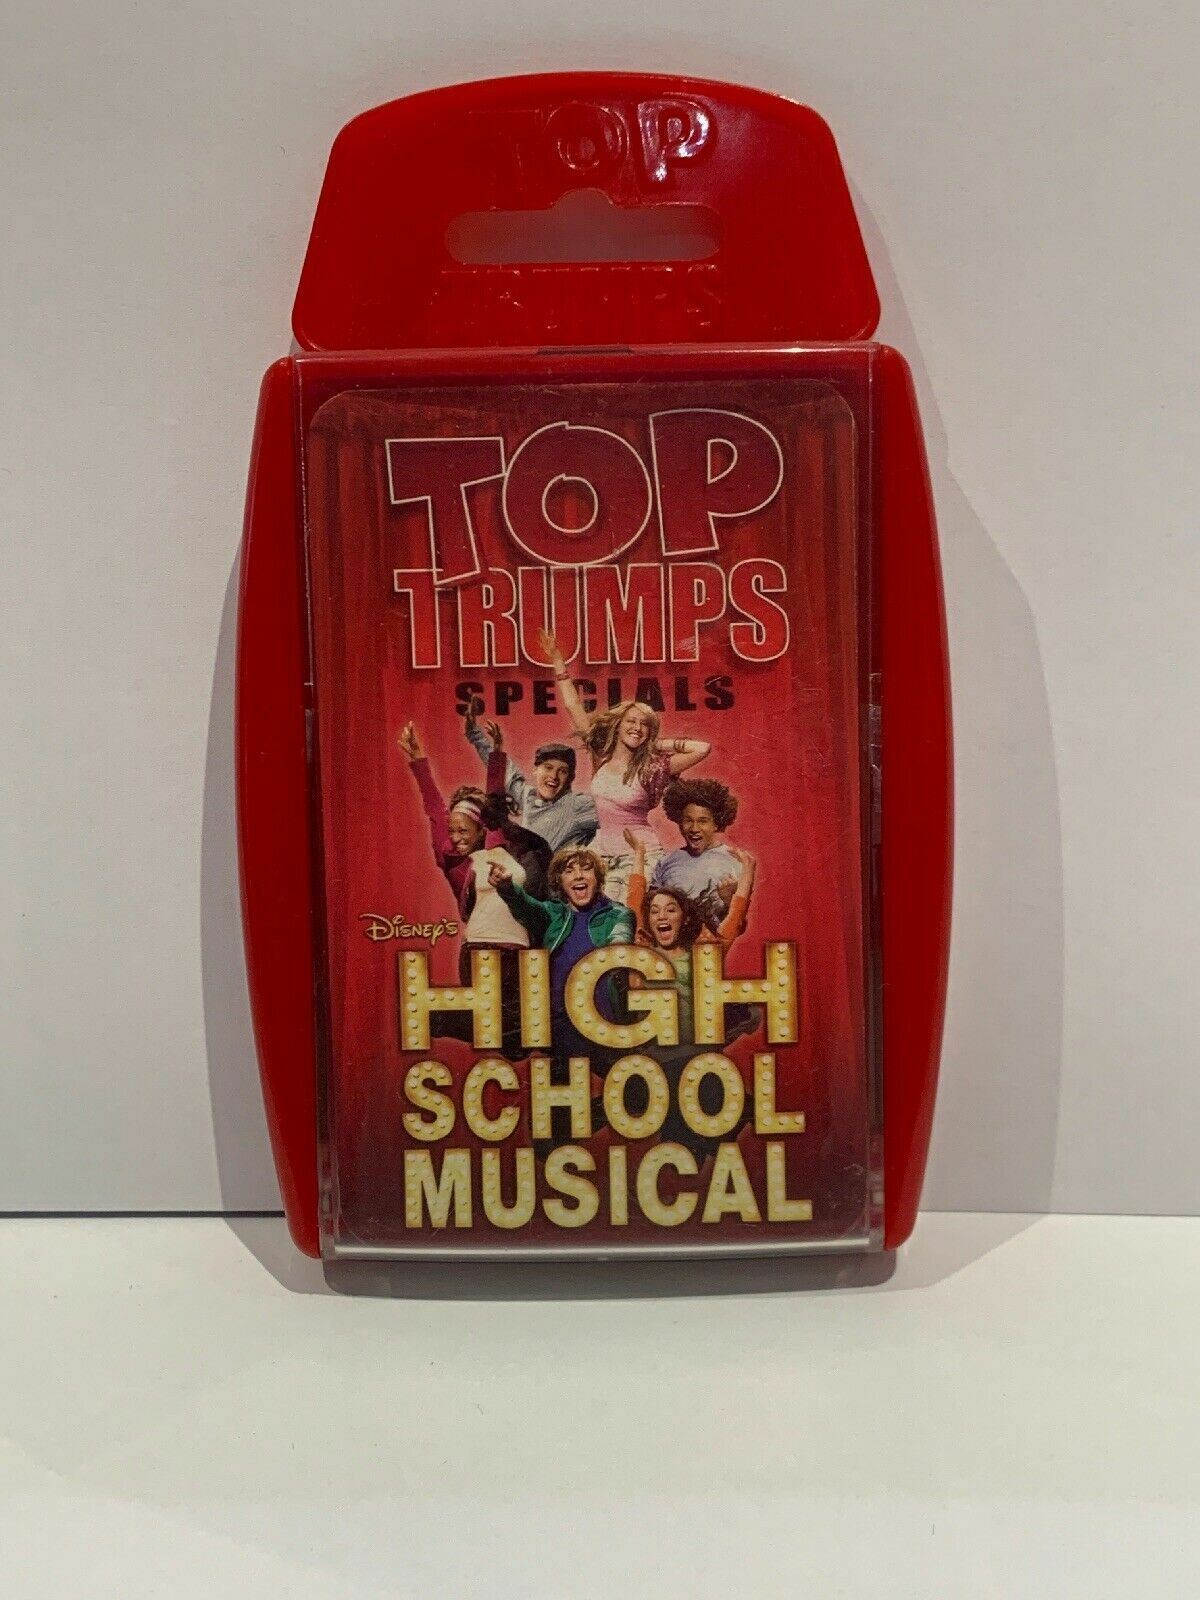 Top Trumps: High School Musical Good Condition 2007